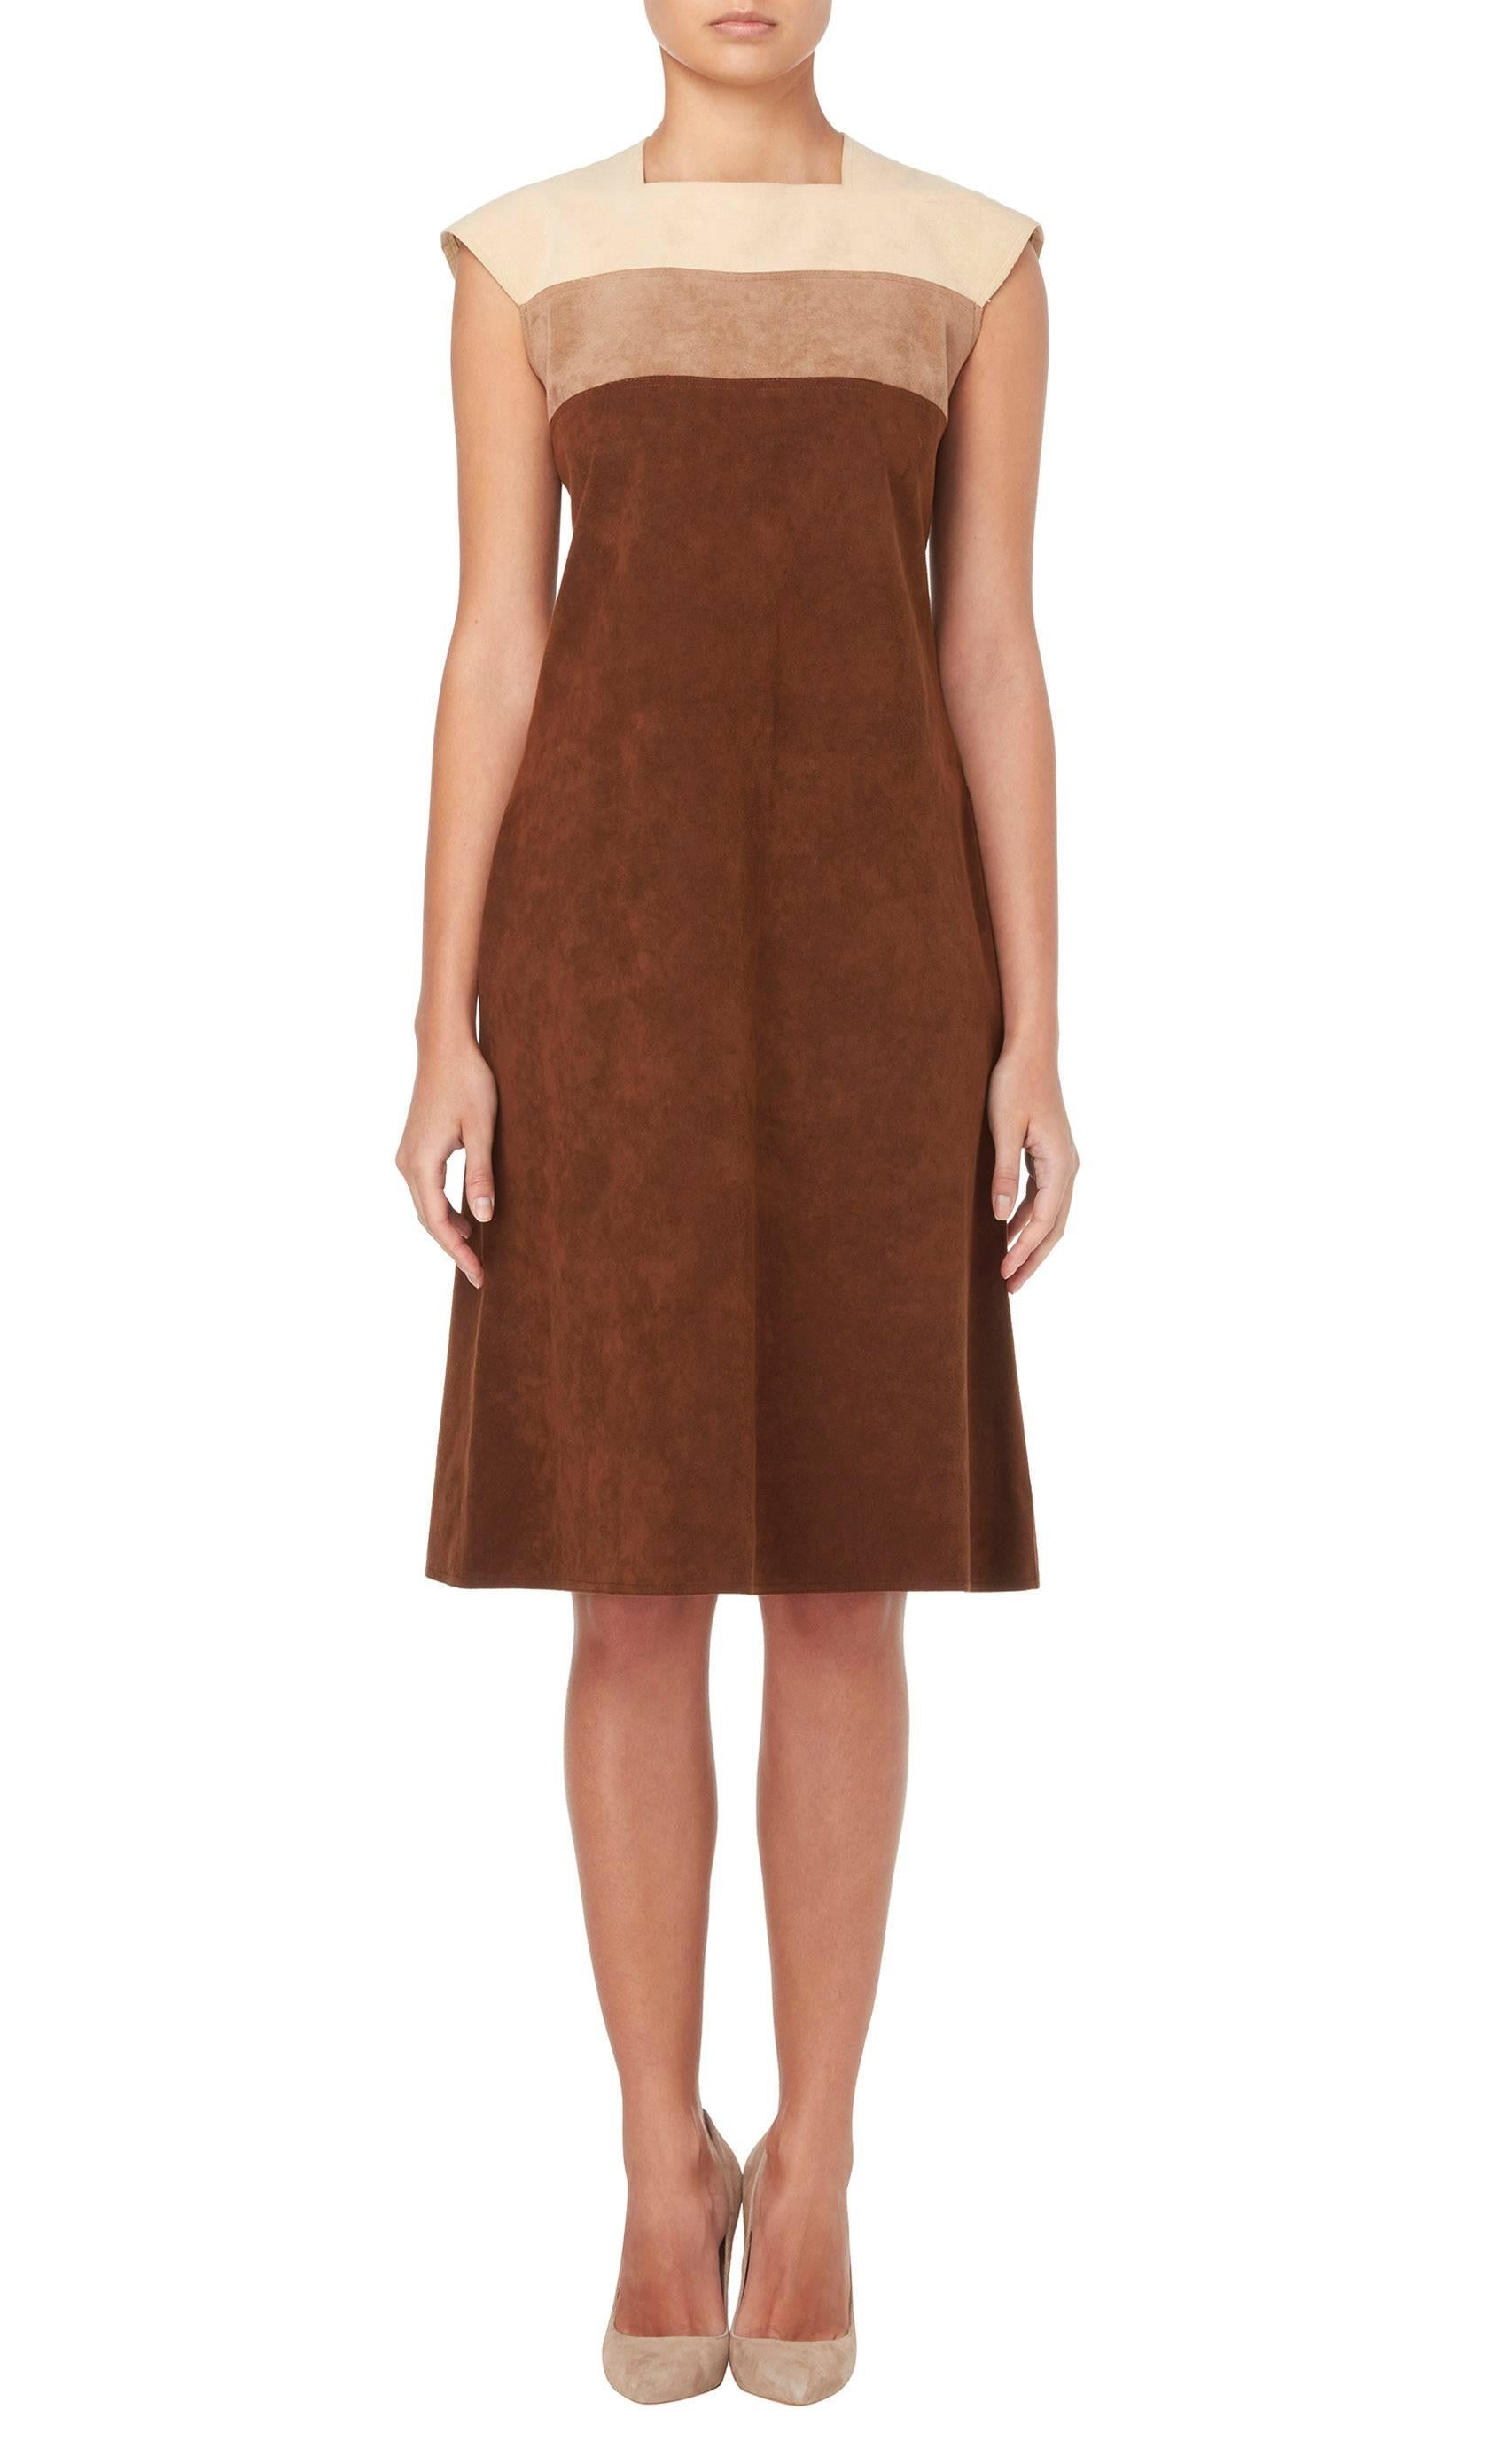 A great day dress, this Mollie Parnis shift is so easy to wear. Constructed in soft brown ultrasuede, the dress features a square neckline and panels of tan and ivory, creating a neutral colour blocked effect.

Constructed in shades of brown